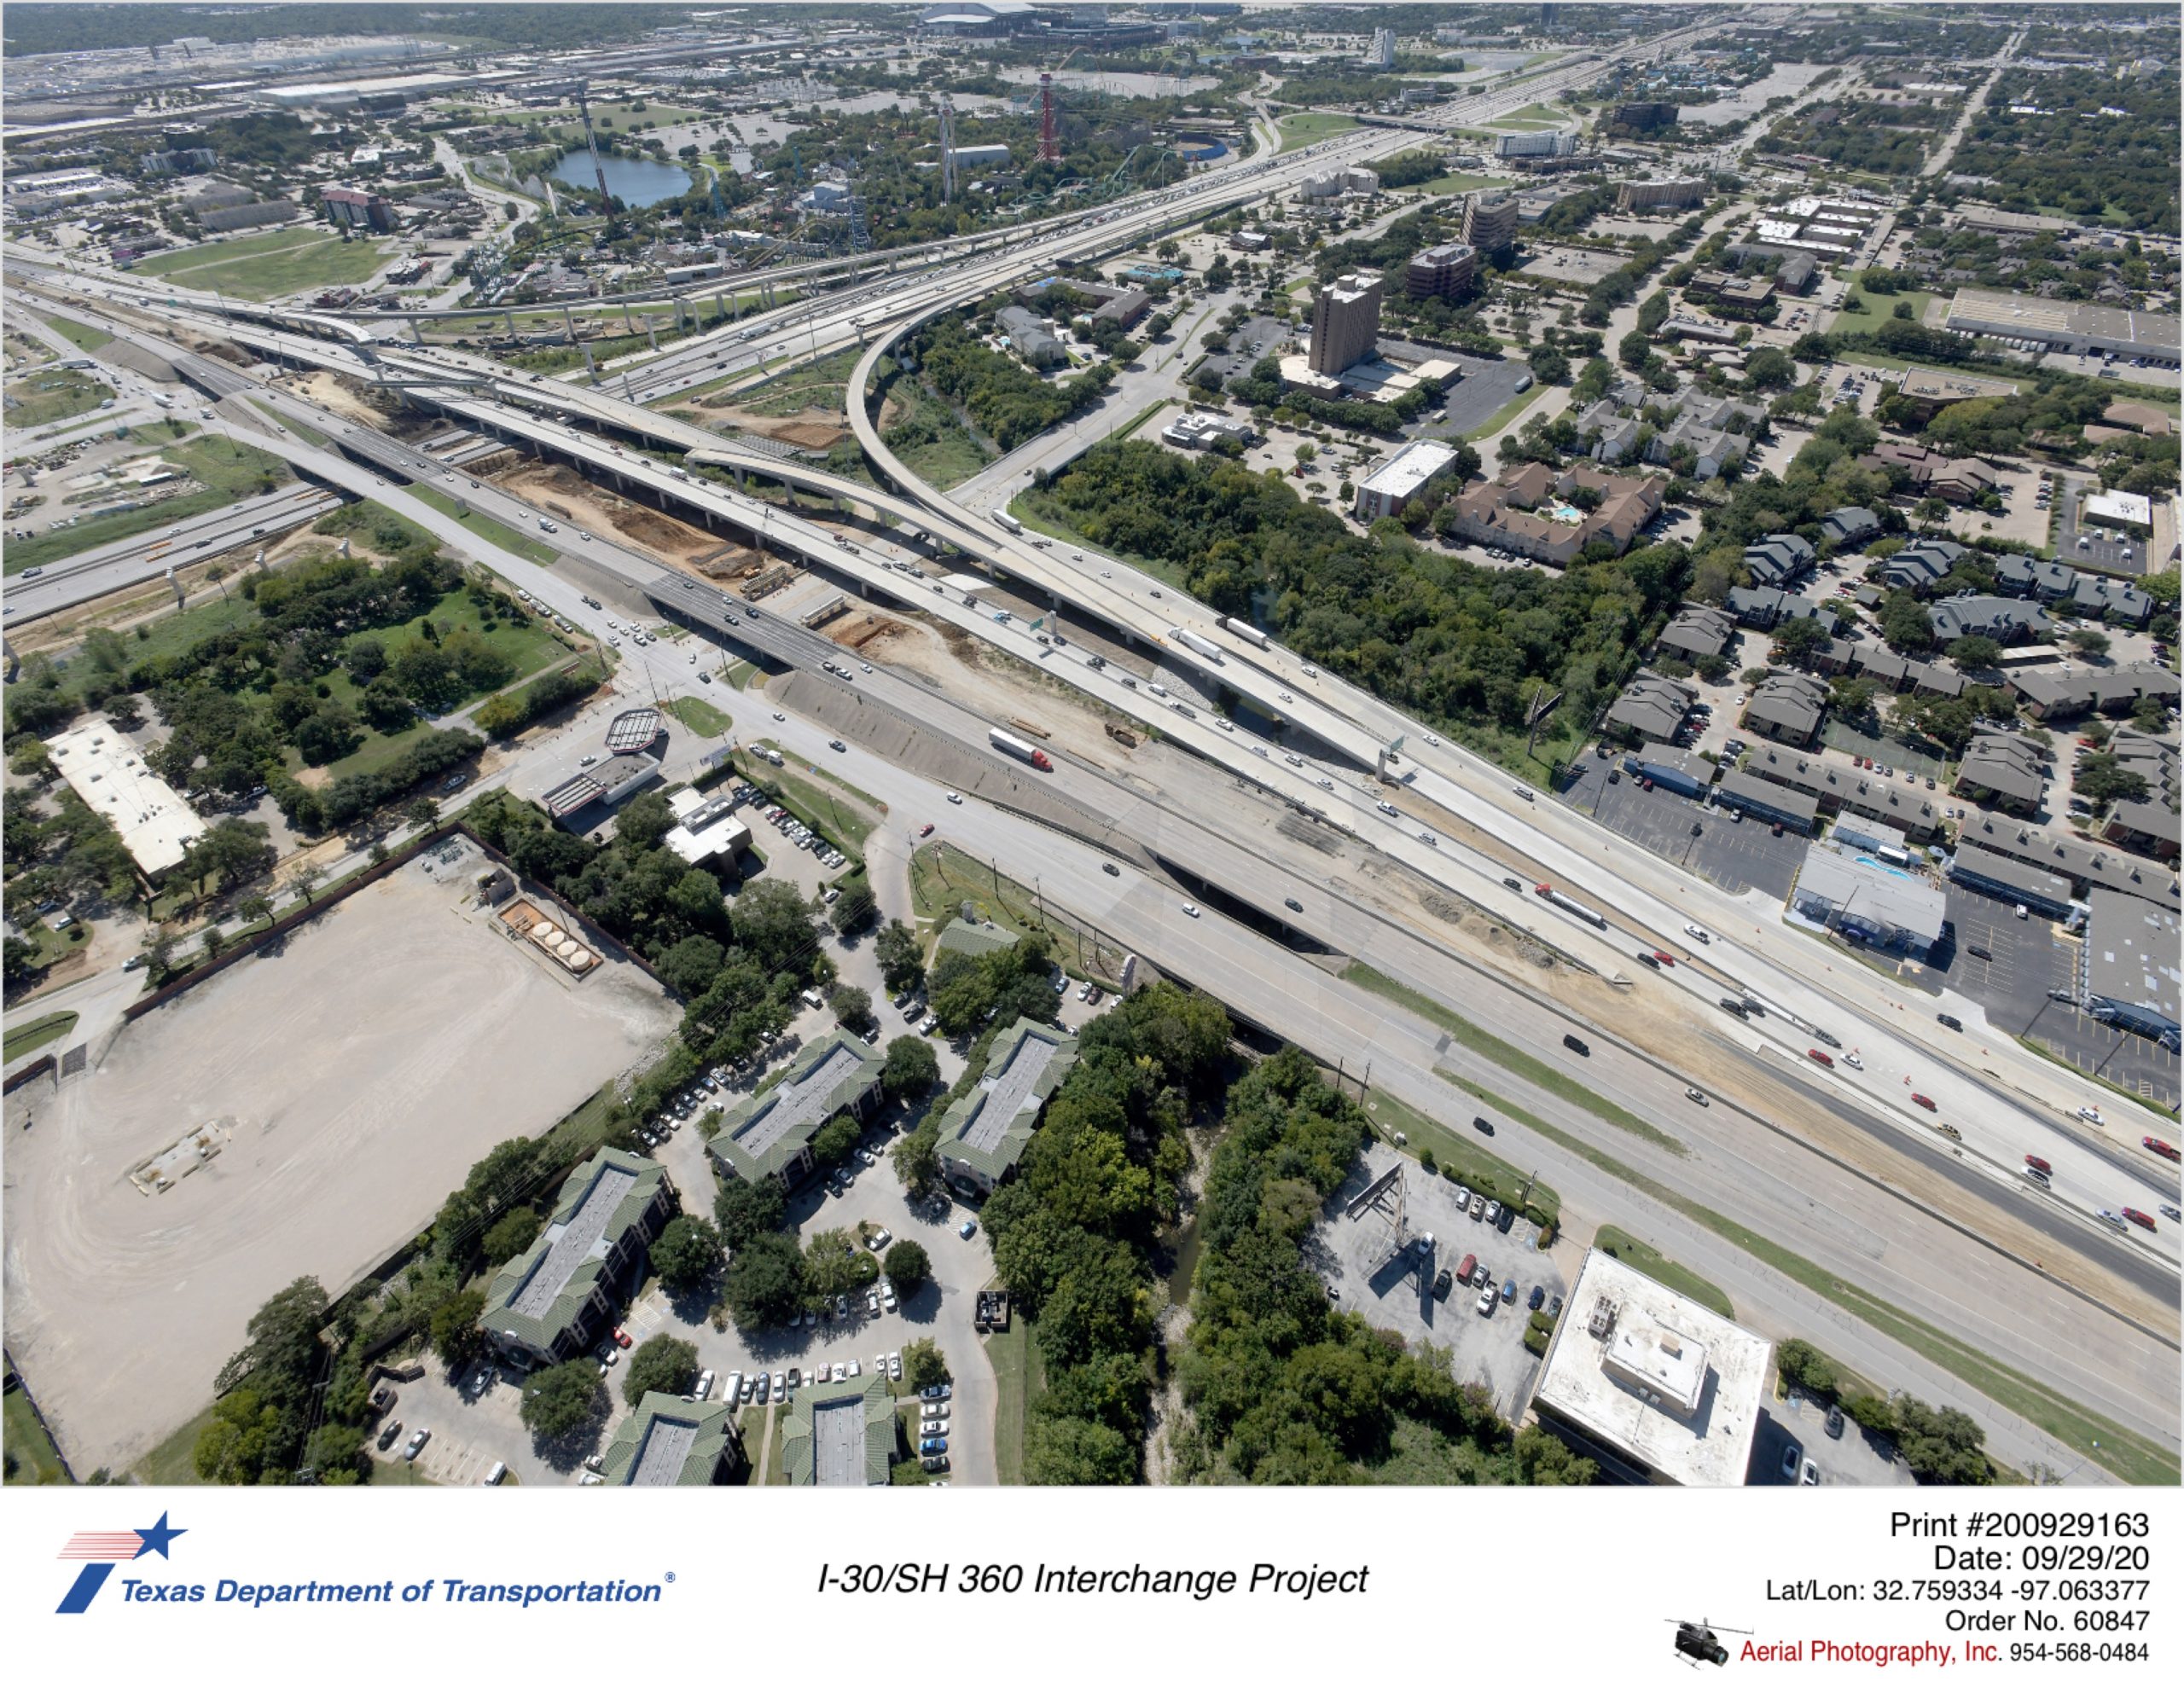 I-30/SH 360 interchange looking southwest. New SH 360 southbound mainlane alignment in use.